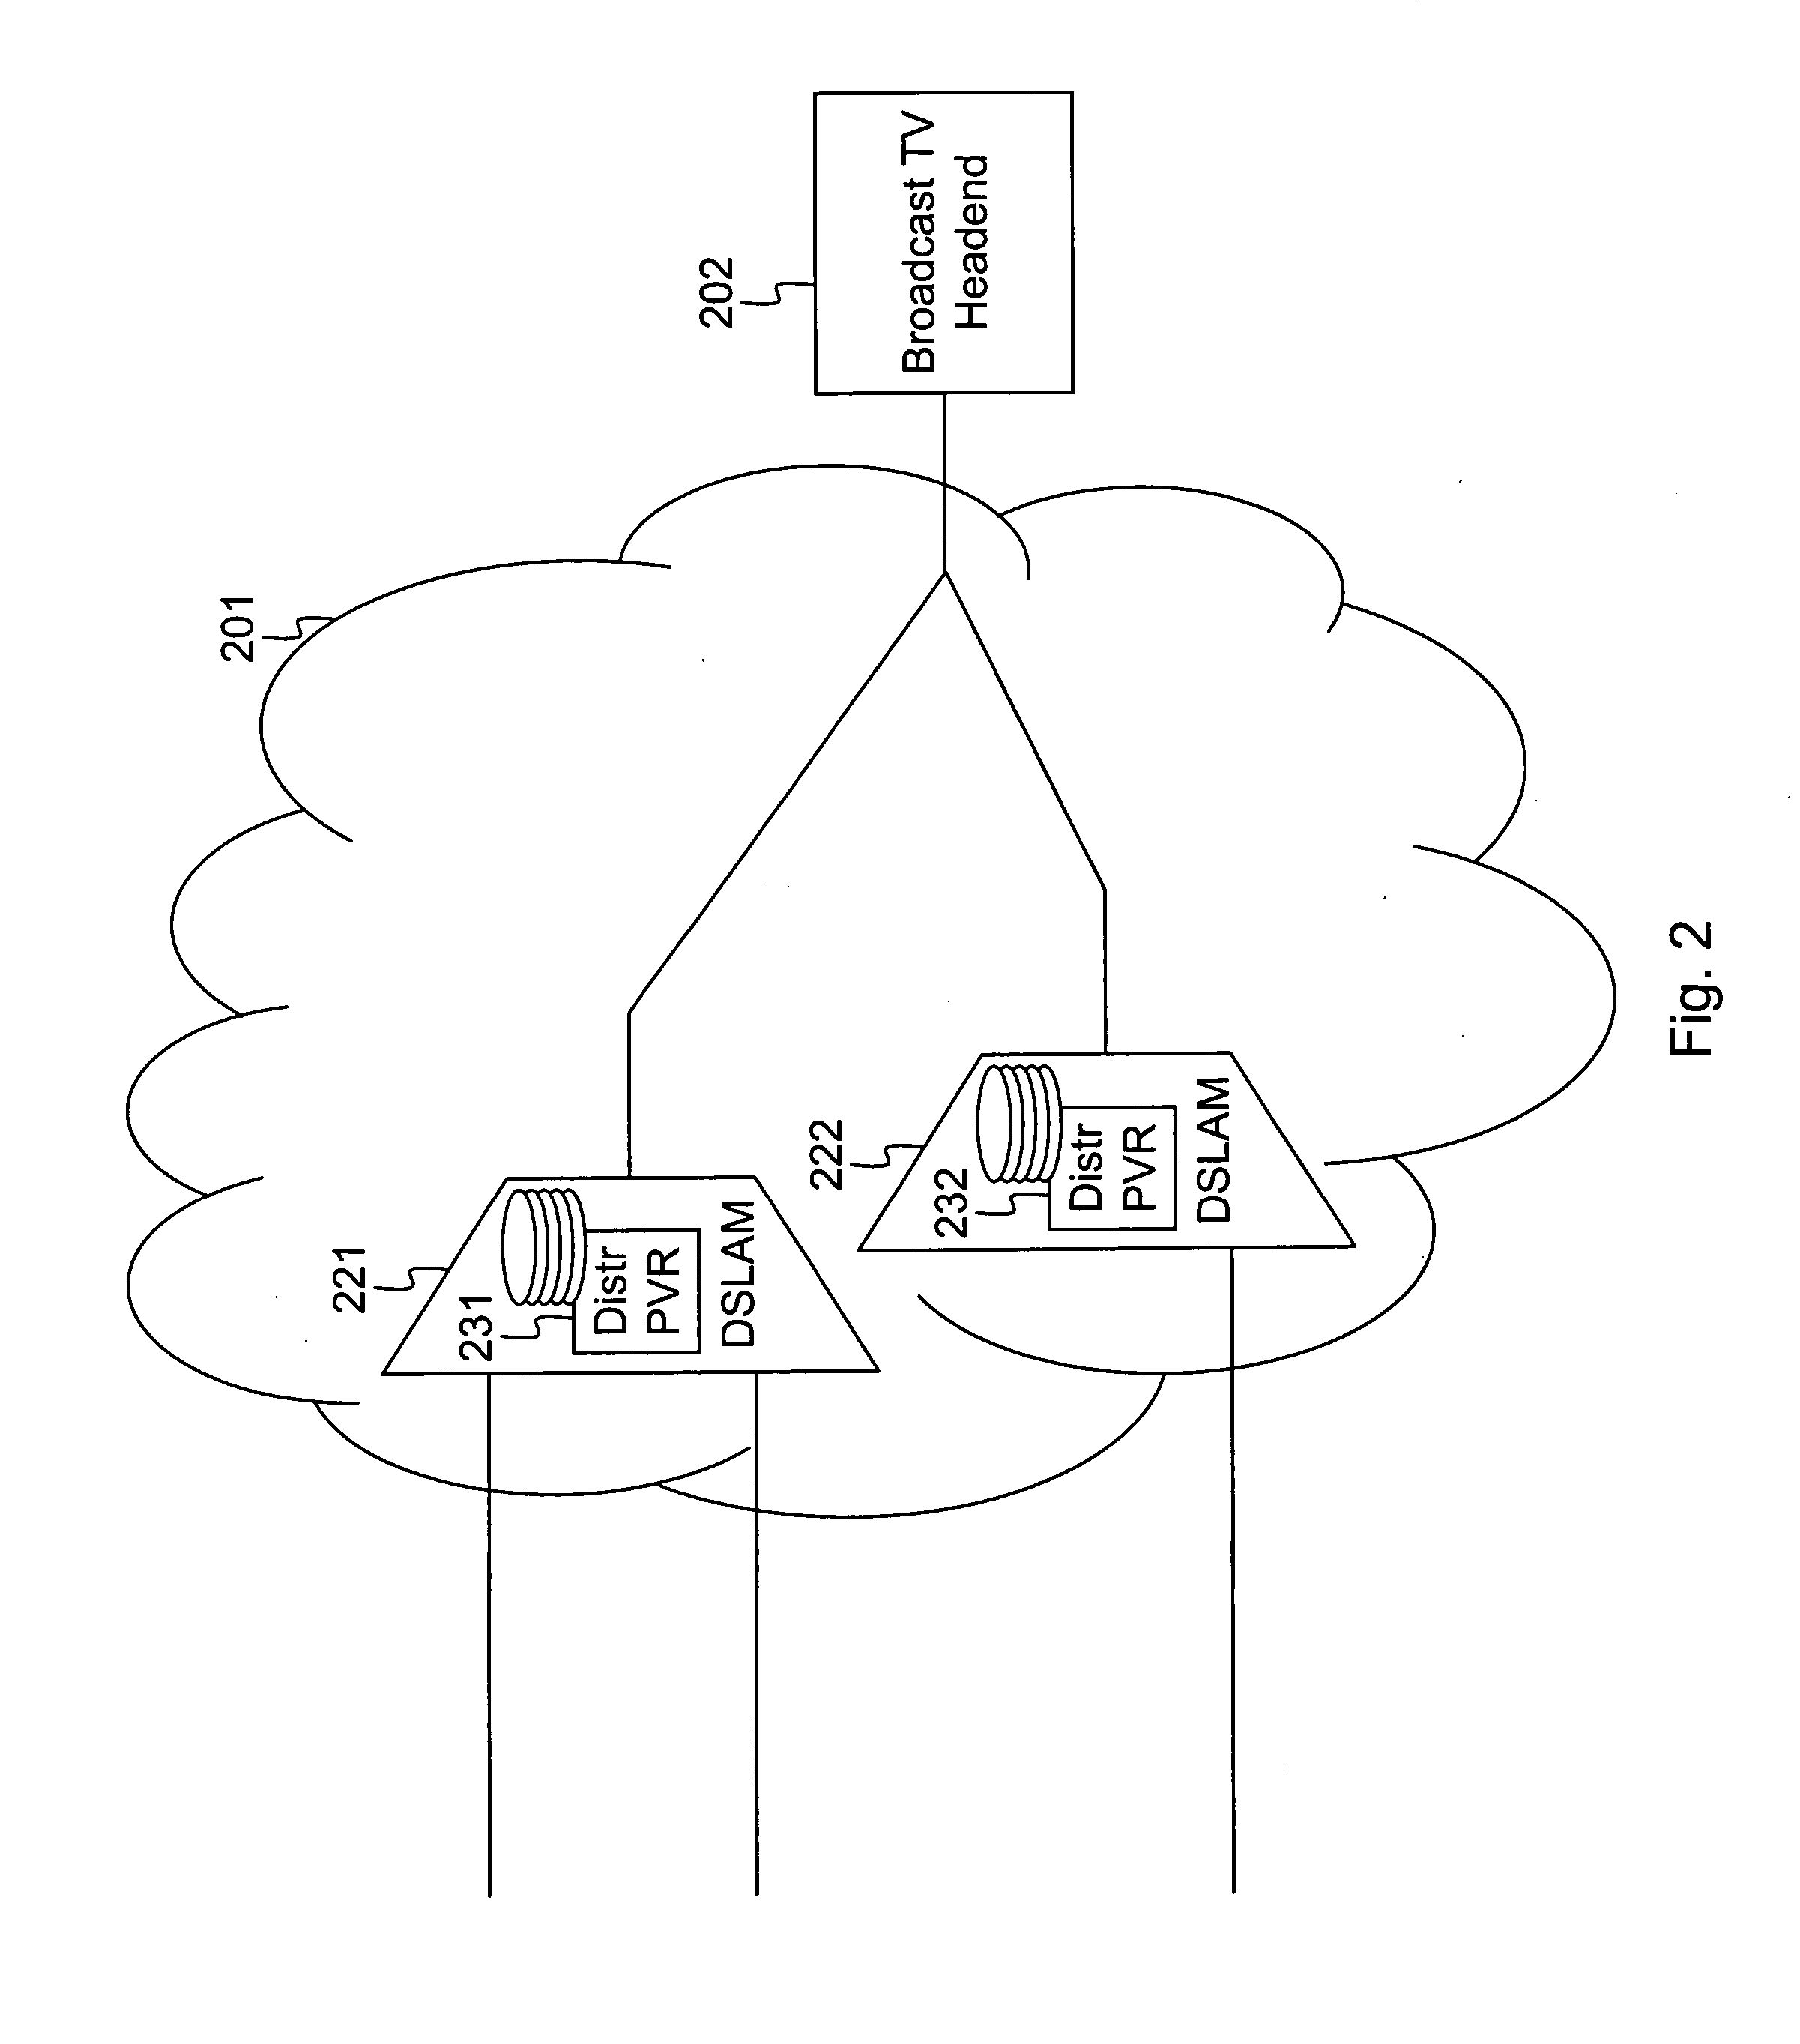 Access/edge node supporting multiple video streaming services using a single request protocol